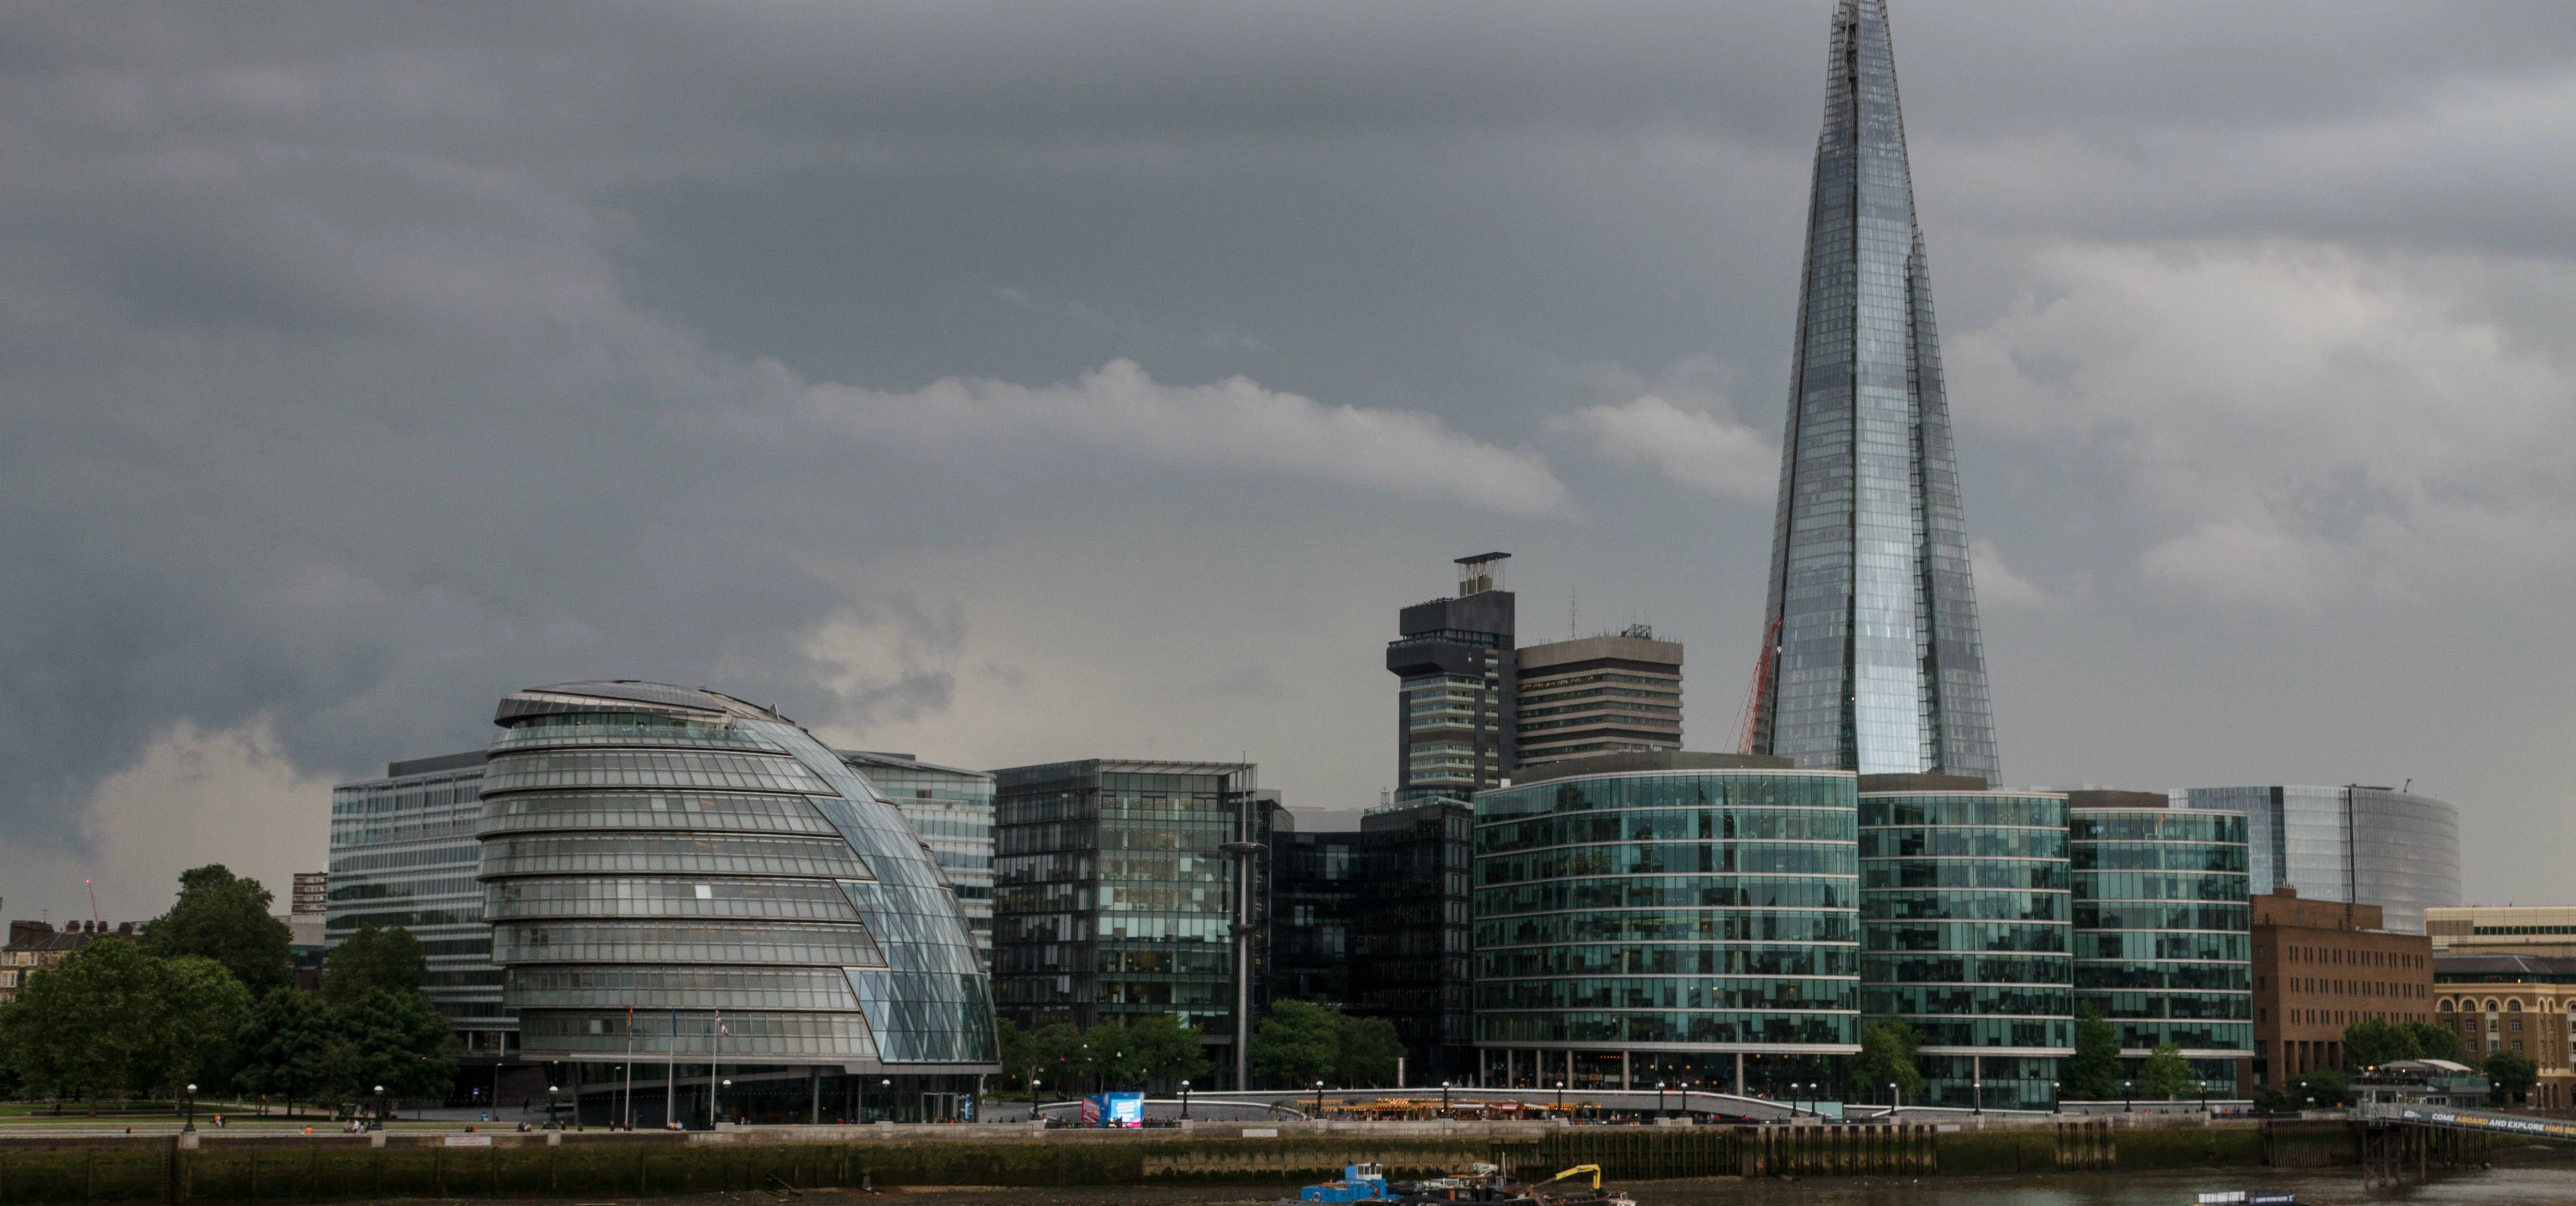 Clouds over City Hall and the Shard